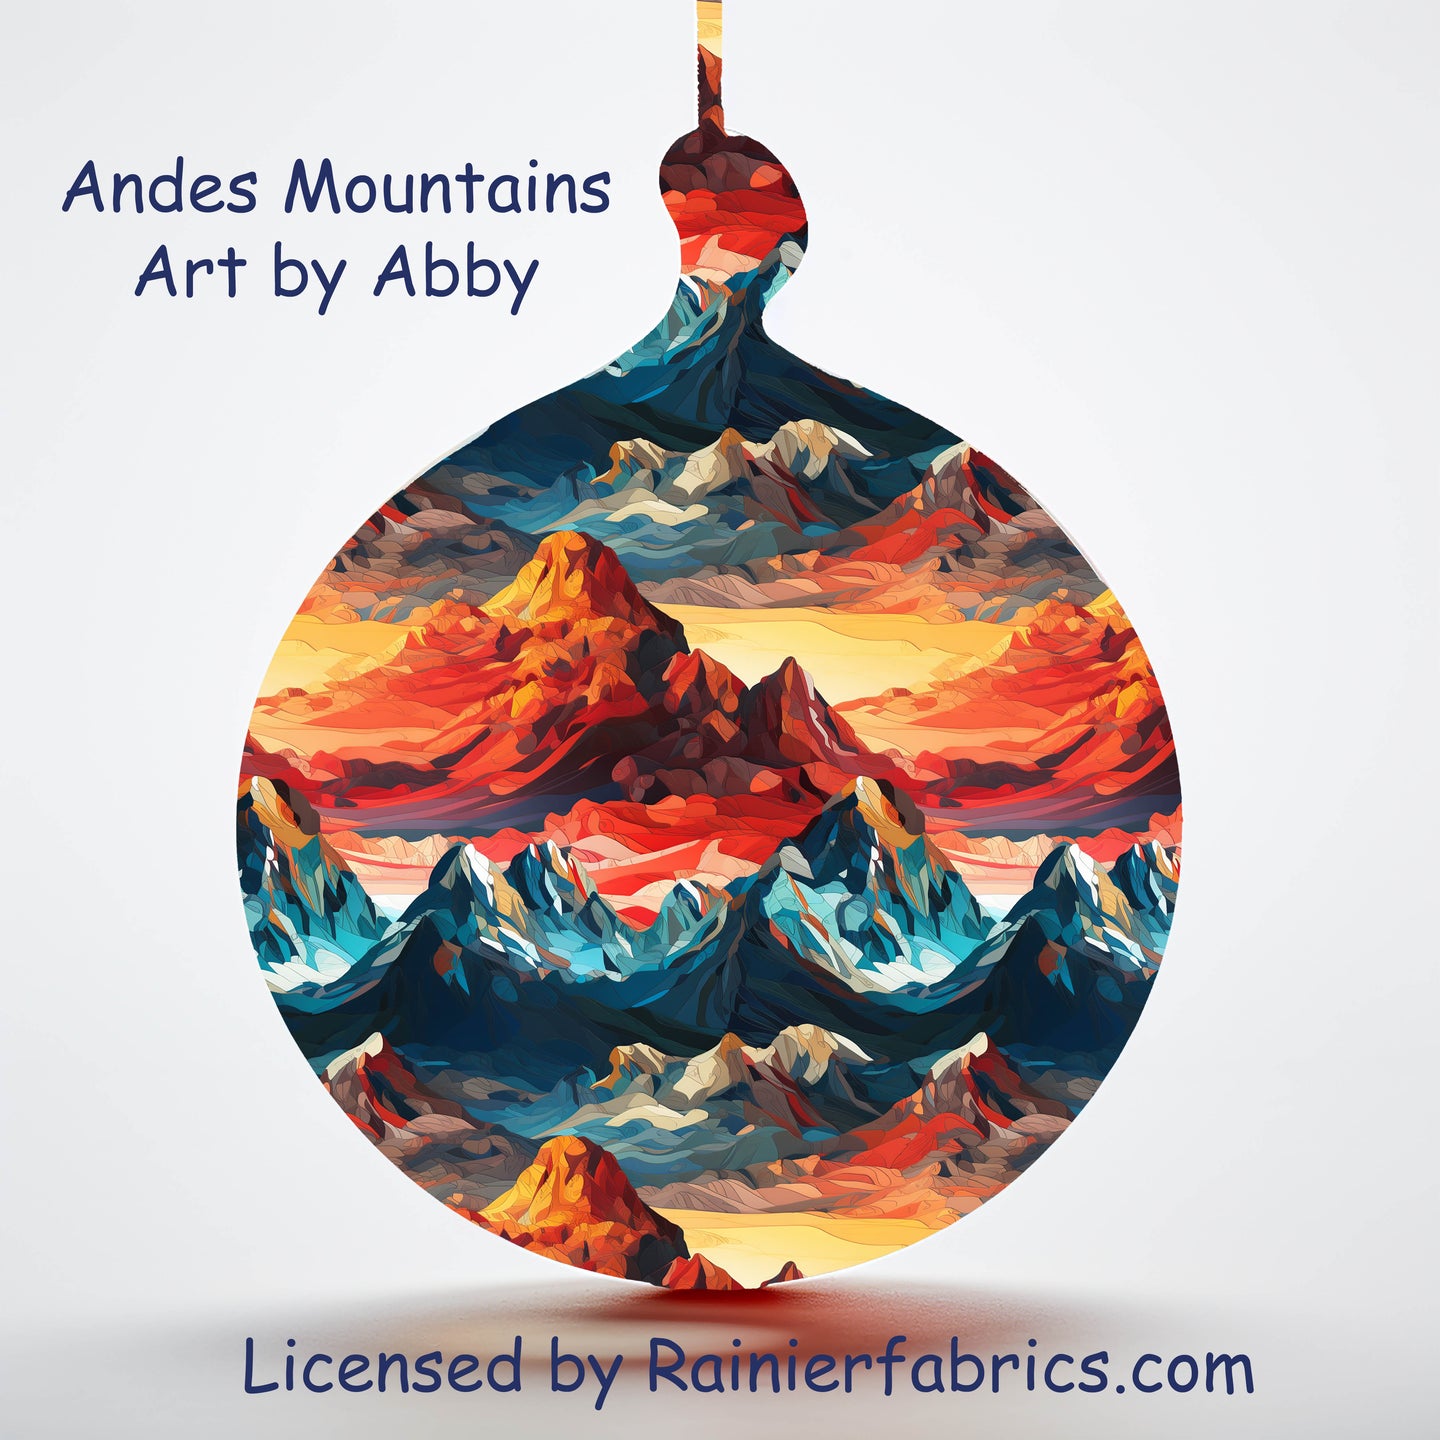 Andes Mountains by Abby